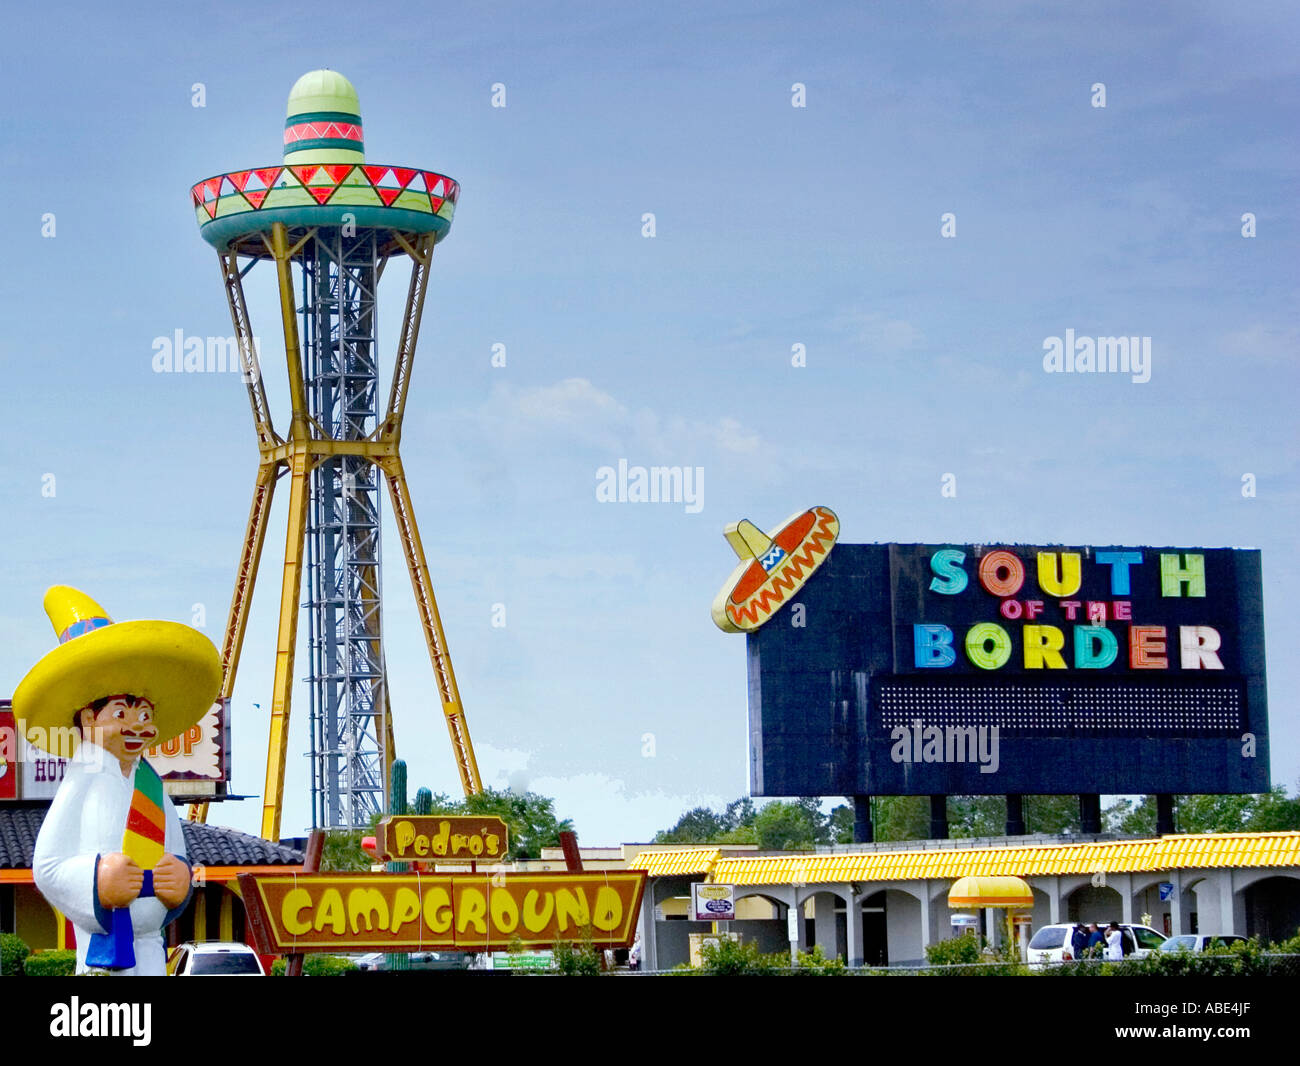 Entrance to South of the Border a giant Mexican themed highway rest stop in Dillon South Carolina Stock Photo